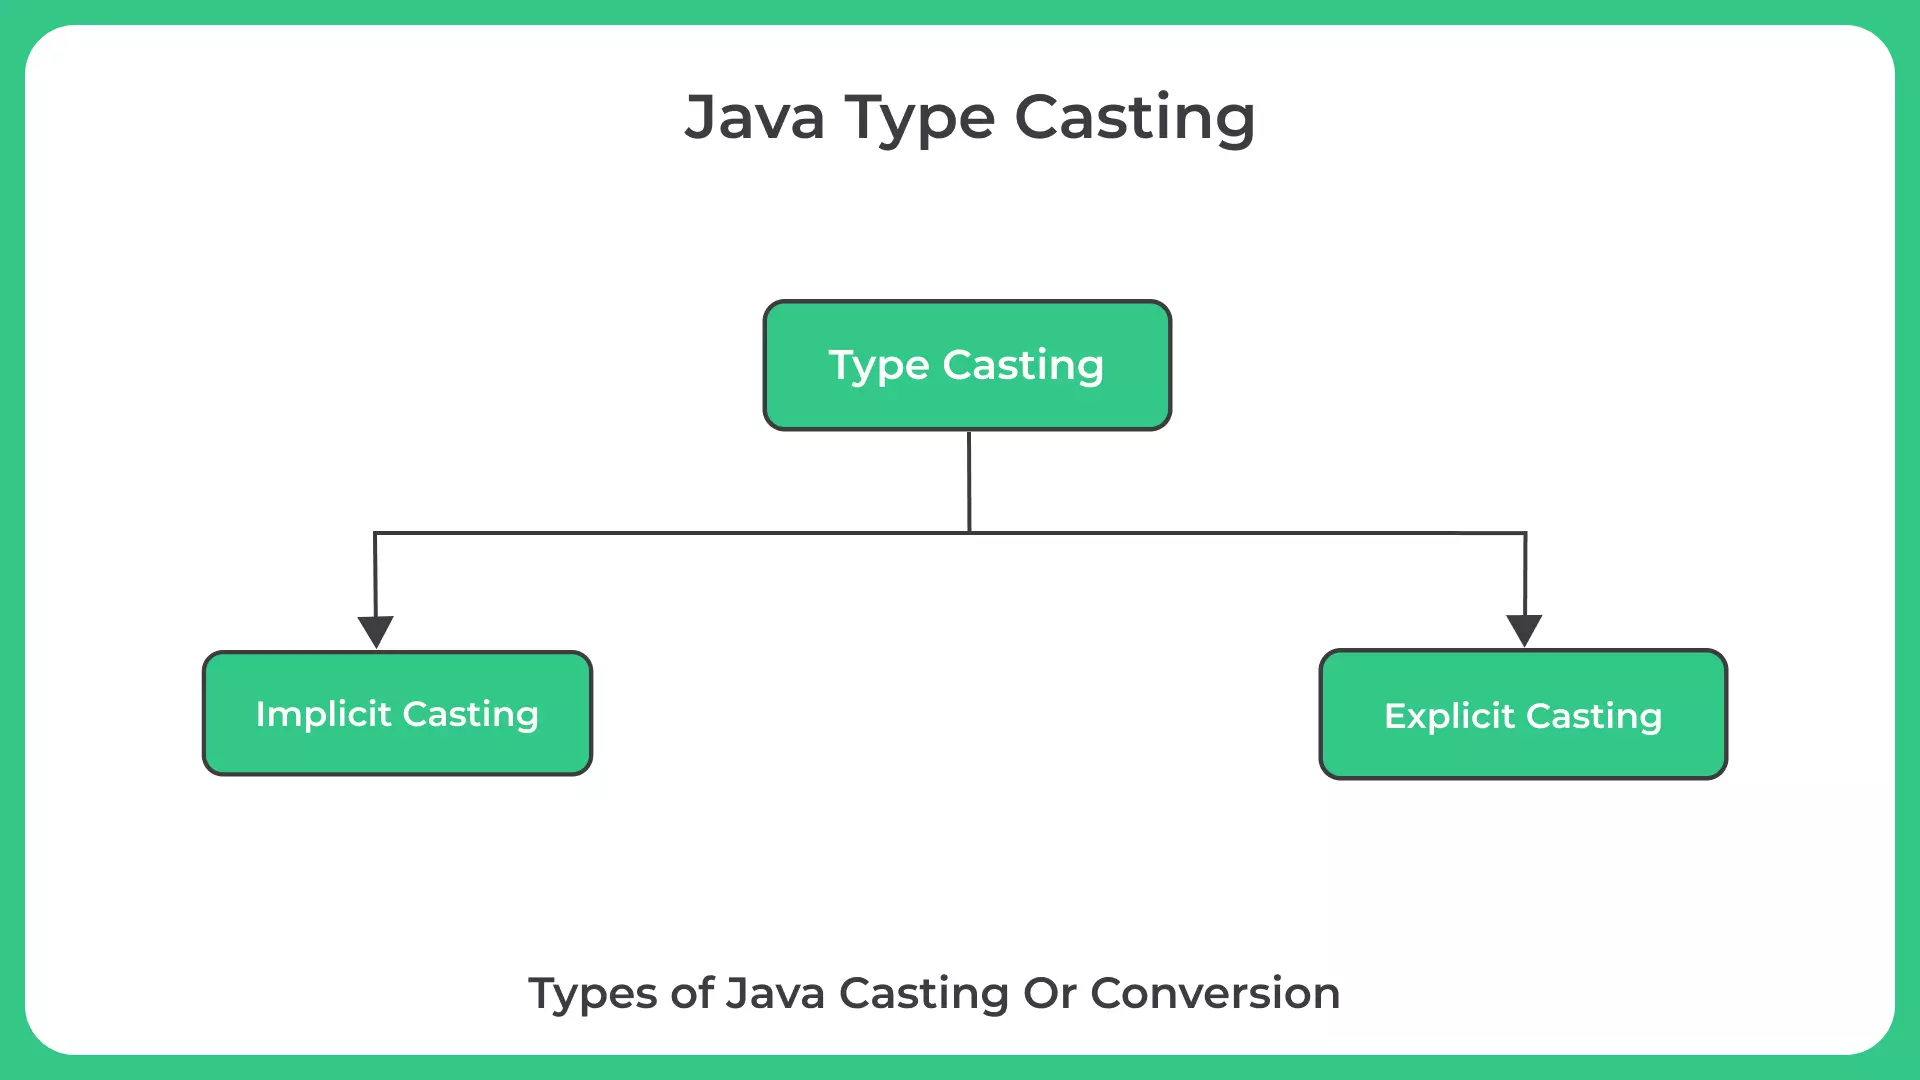 Java Type Casting or conversion